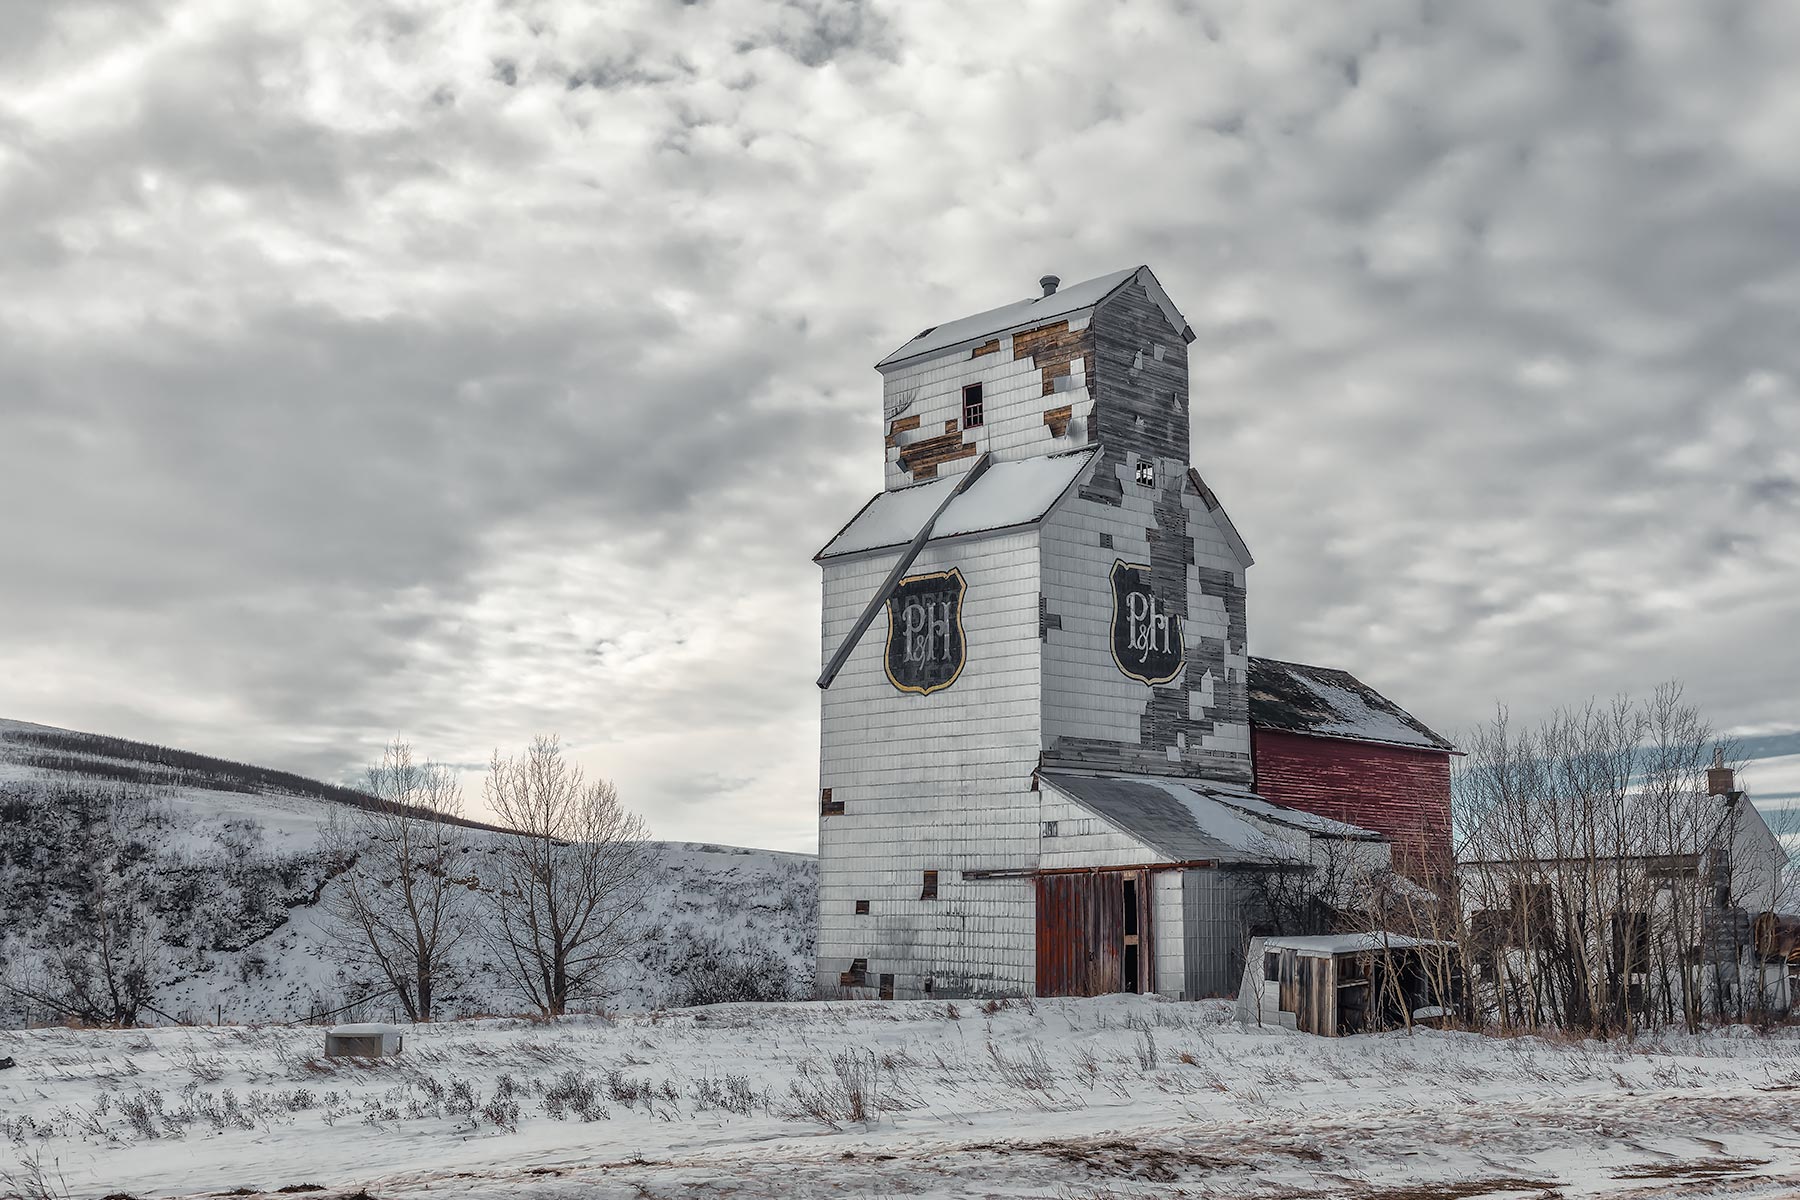 One of the oldest grain elevators from Southern Alberta